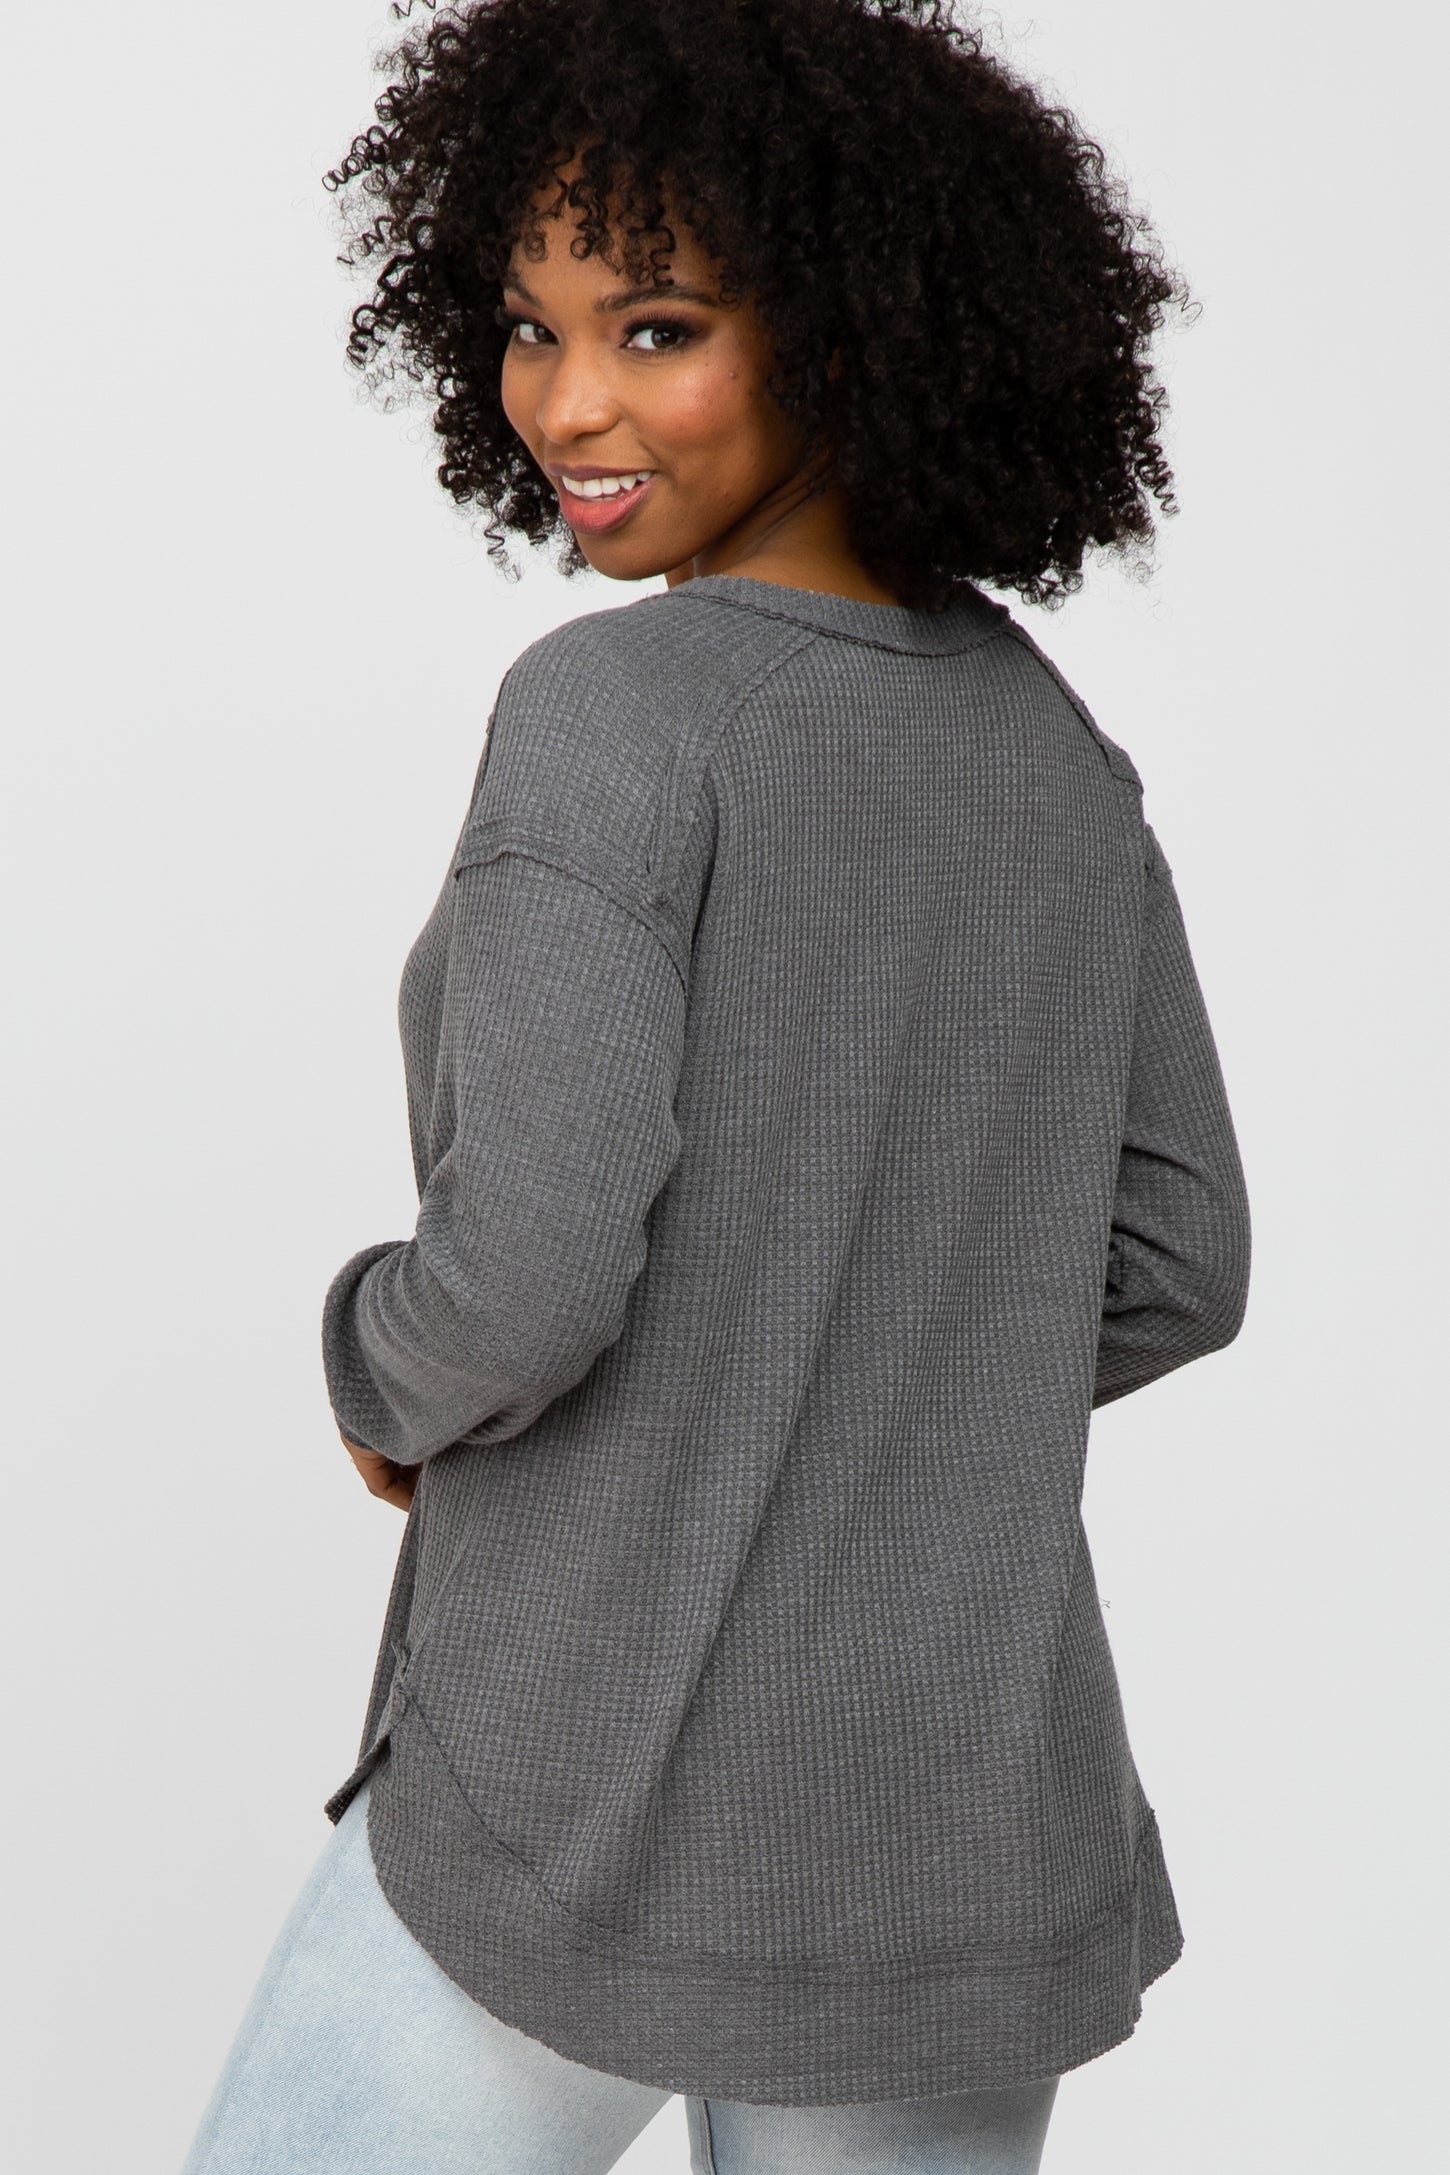 Charcoal Split Neck Exposed Seam Long Sleeve Top